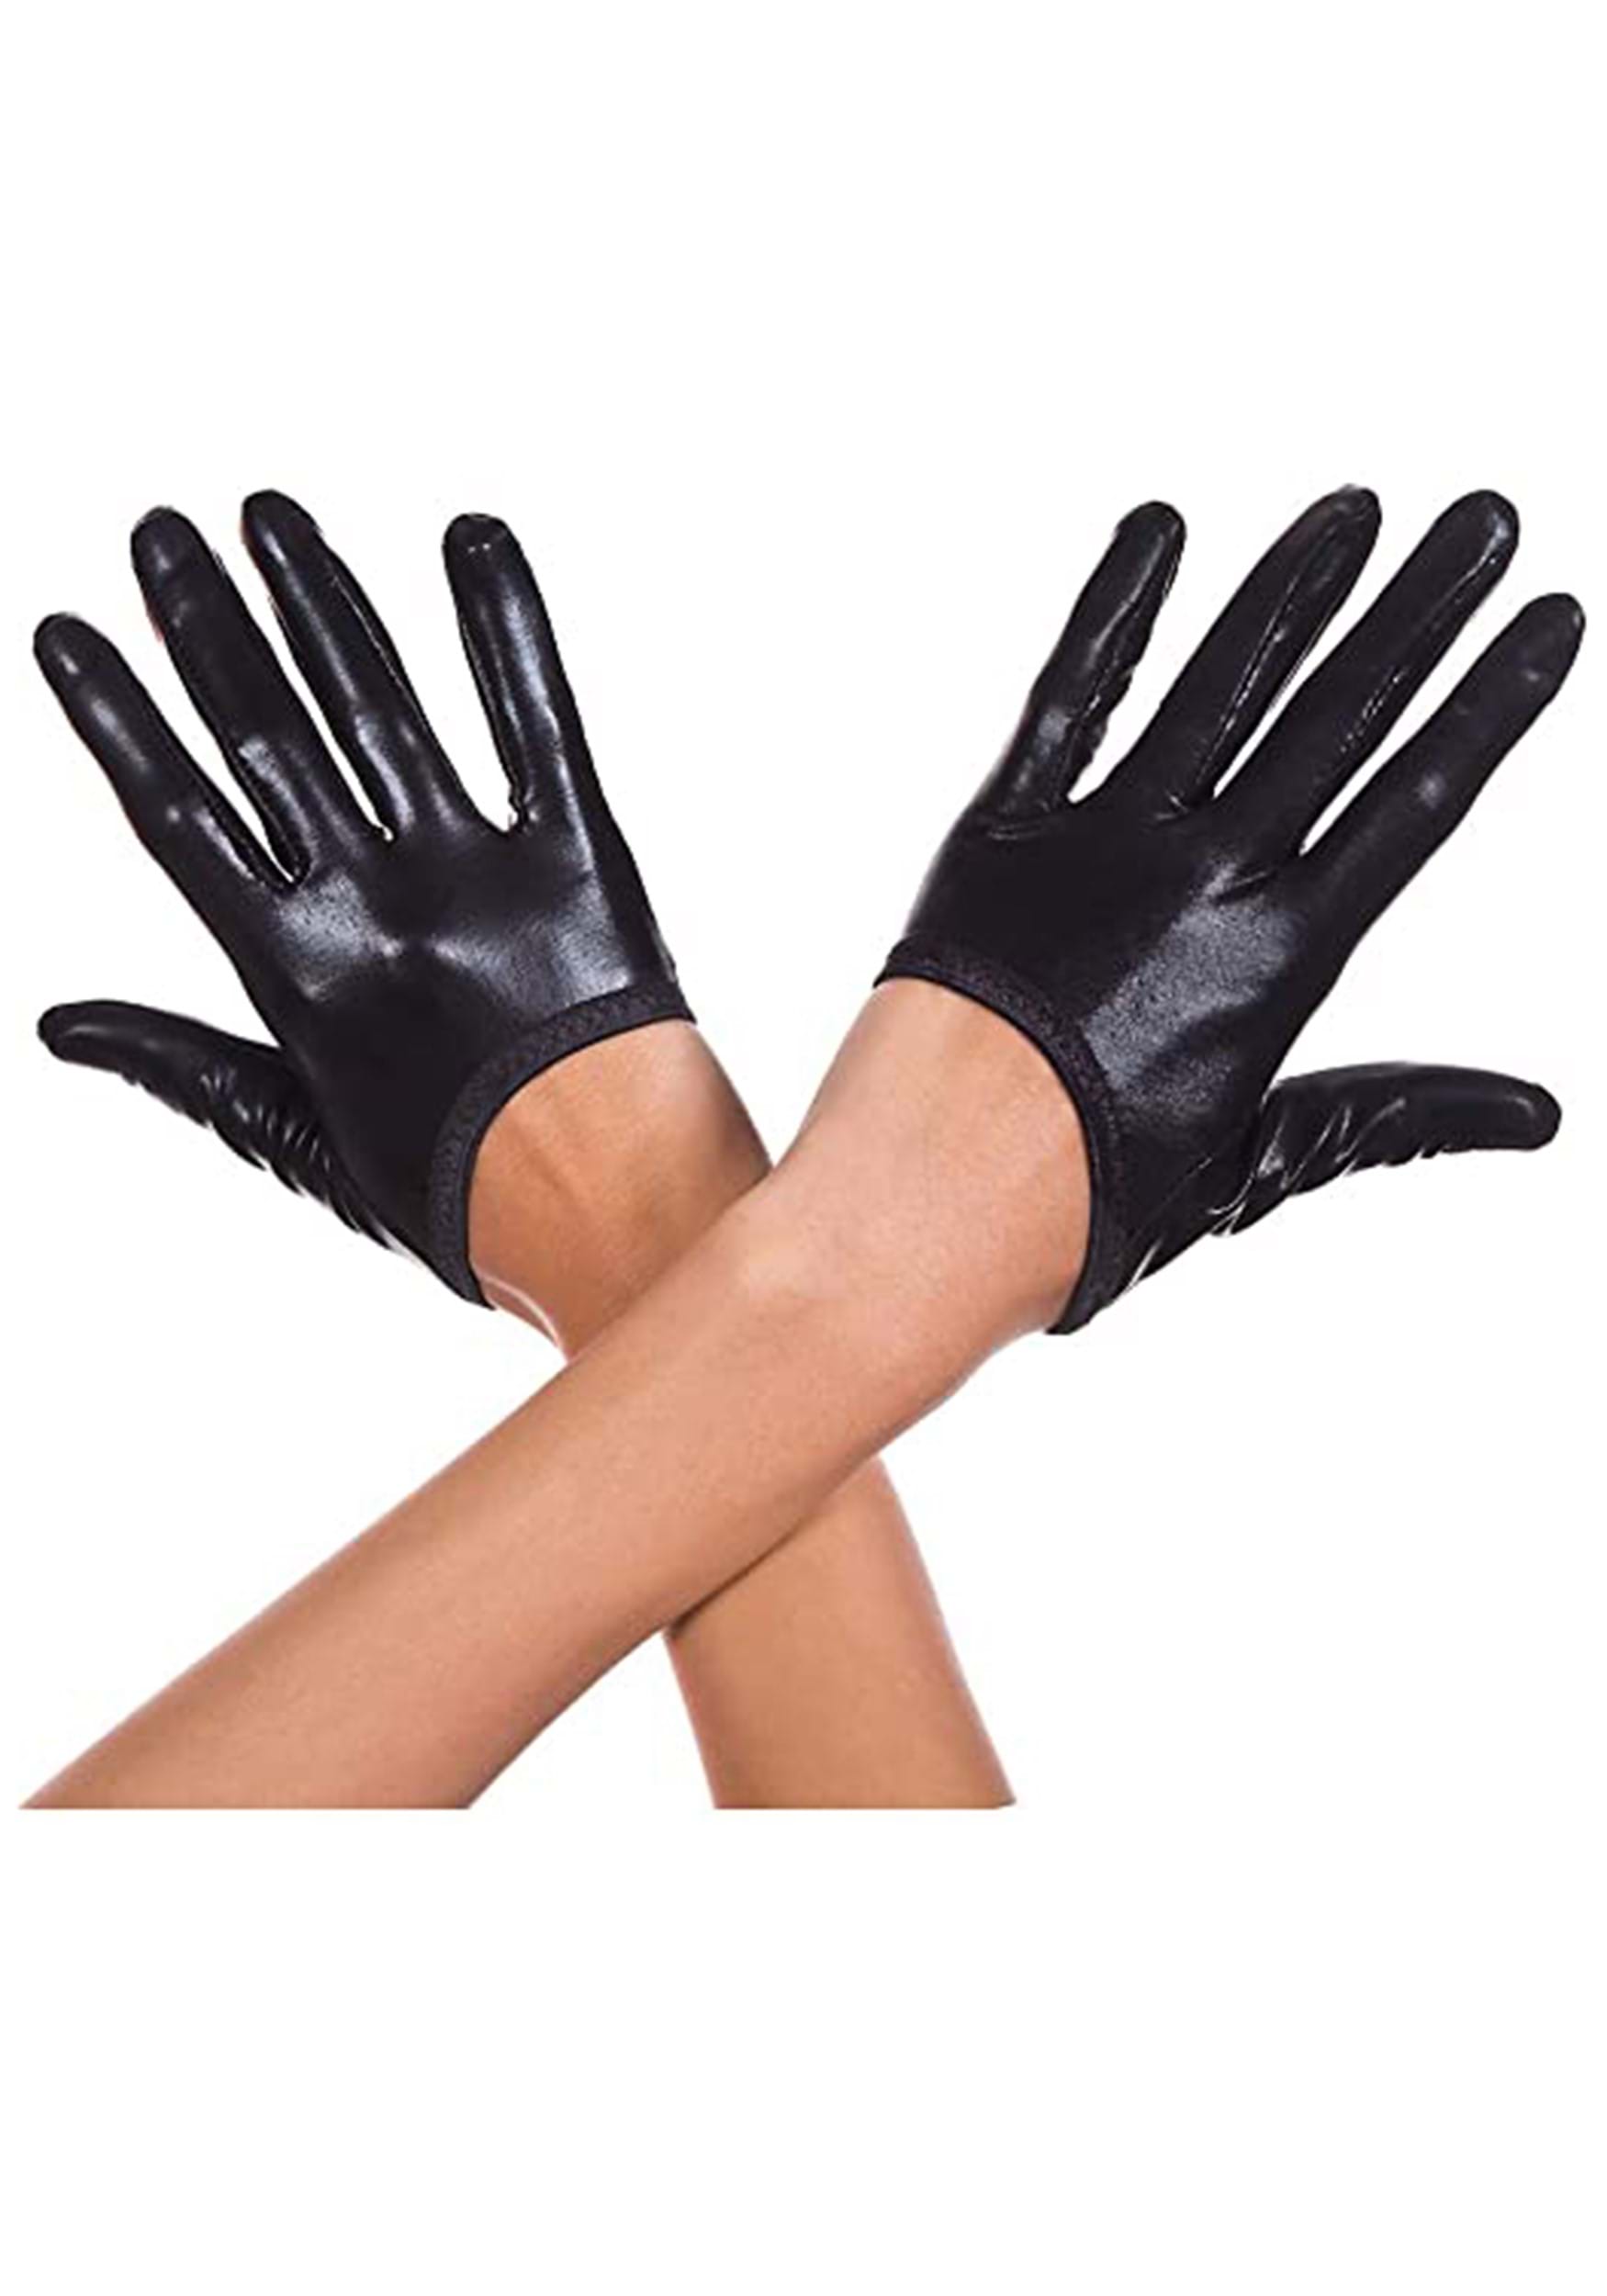 https://images.halloweencostumes.com/products/77309/1-1/black-cropped-gloves.jpg